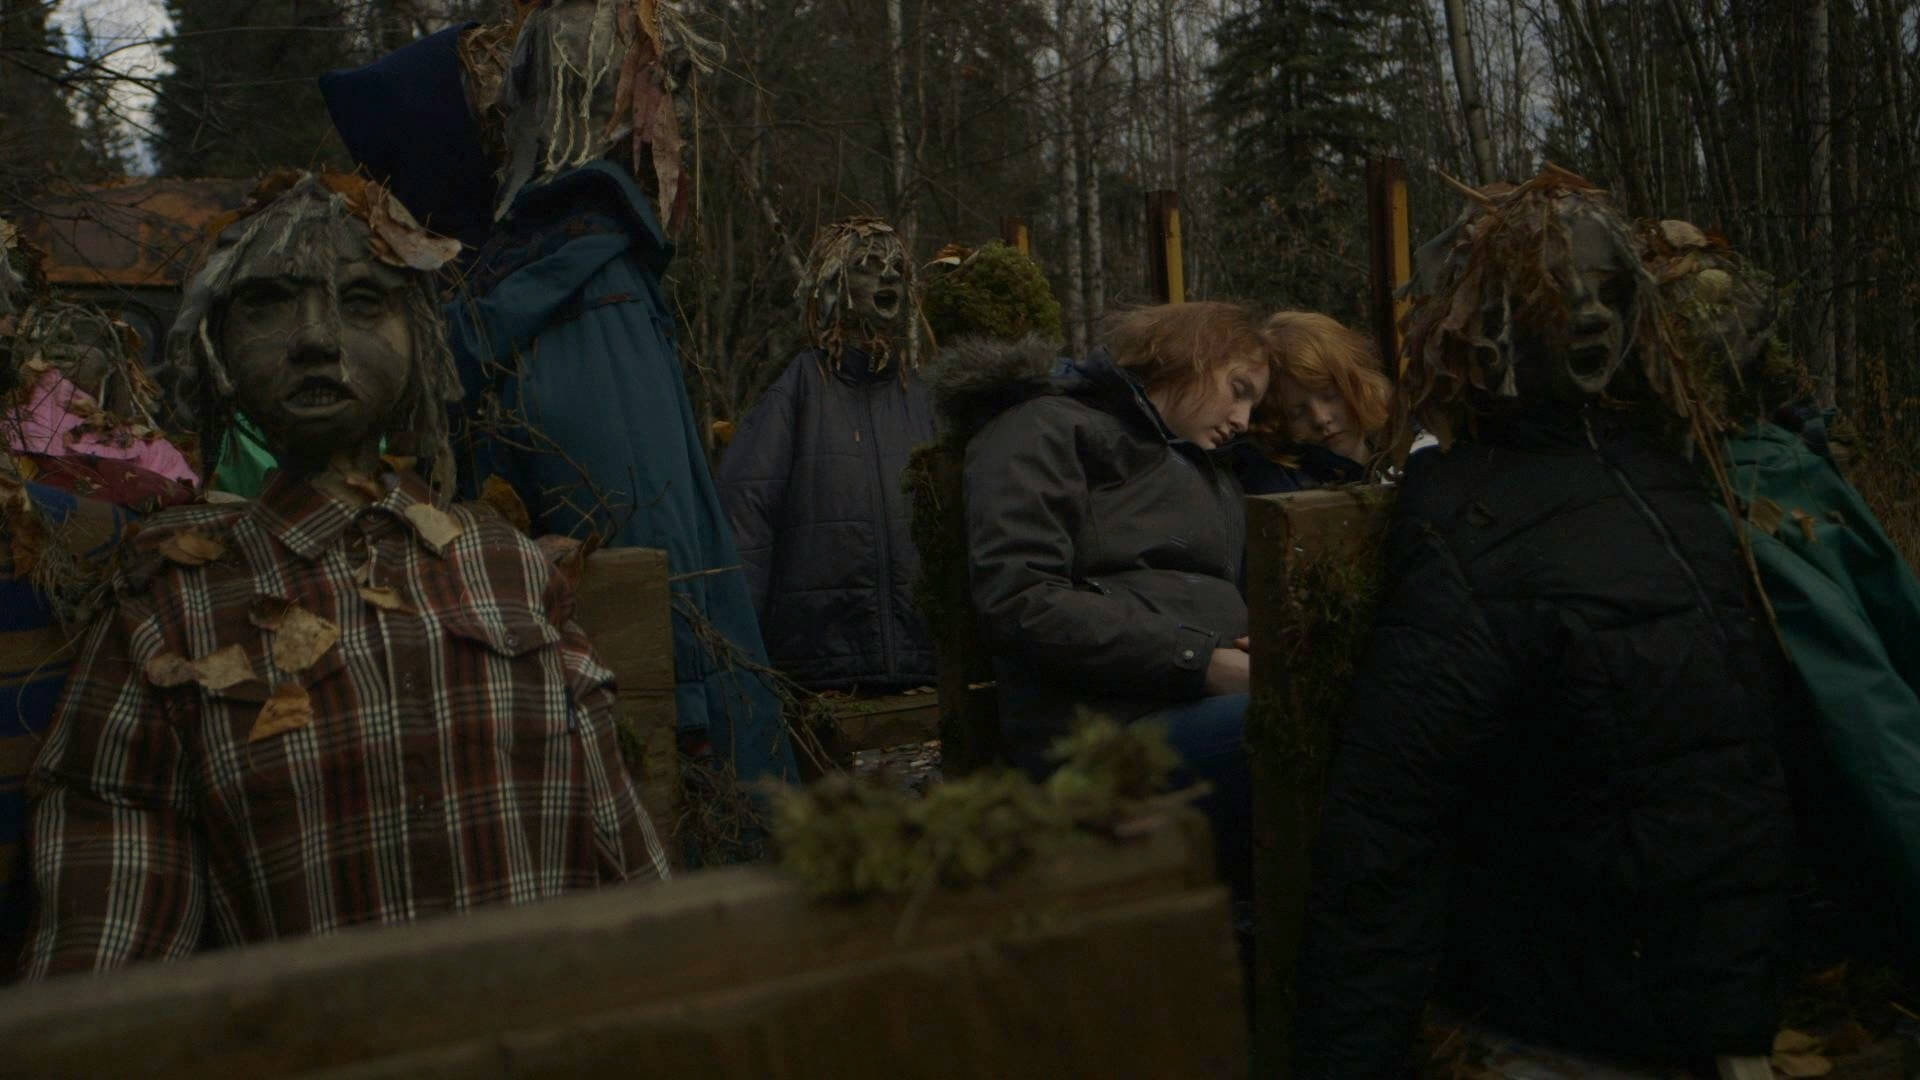 Still from LoveTrue. Two young folks are sitting and reclining their heads on each other, they wear winter jackets. They are surrounded by child-like manequins.